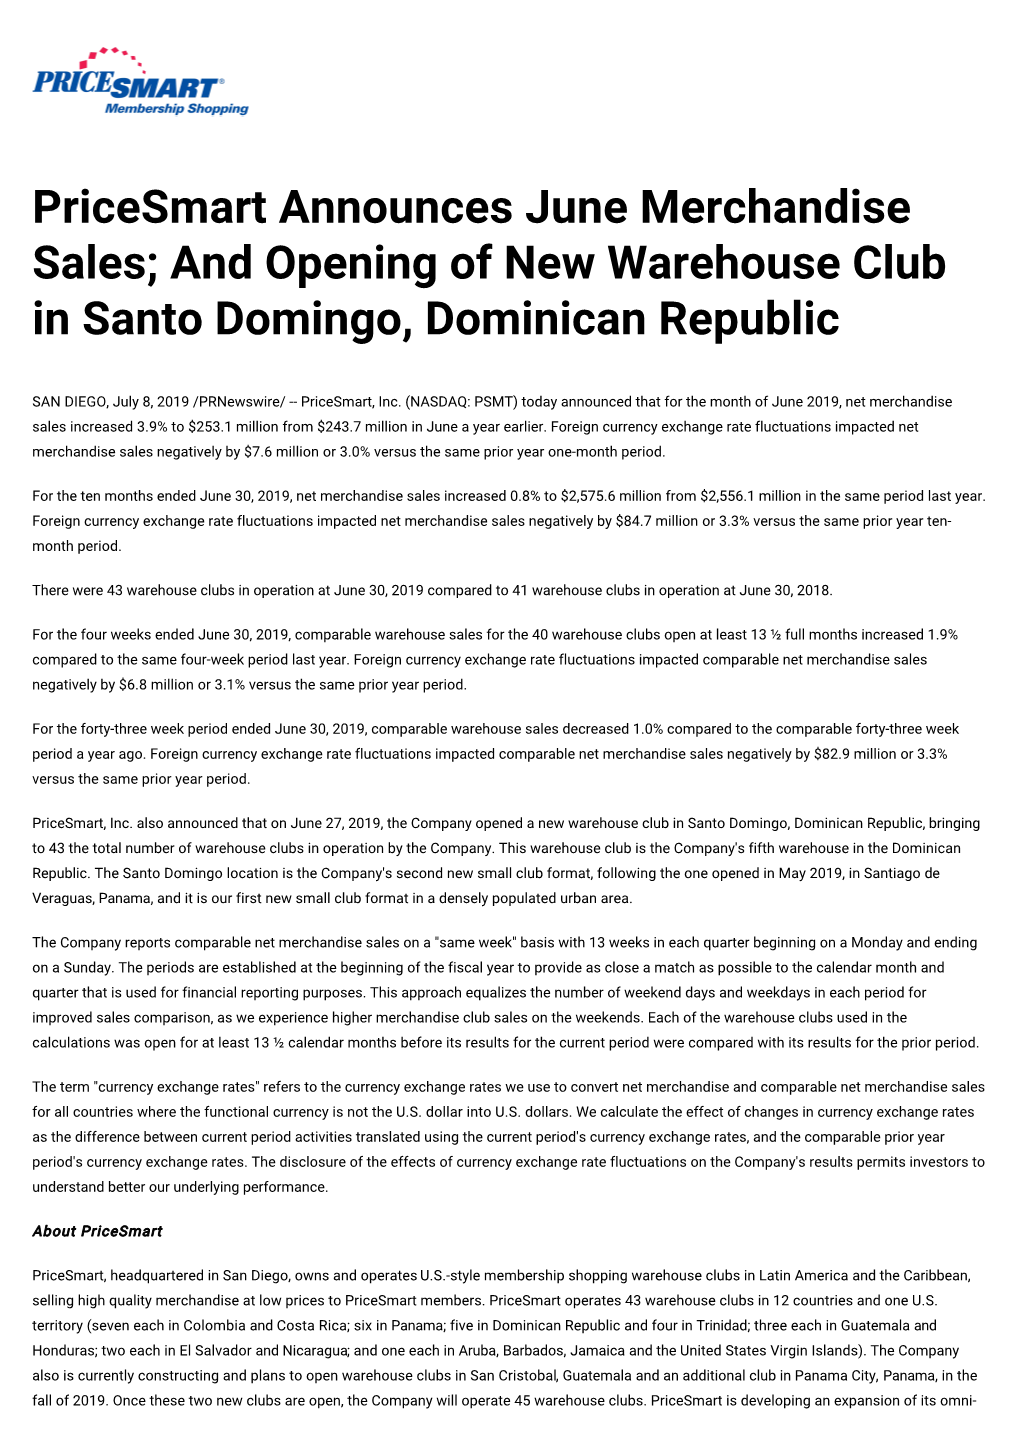 And Opening of New Warehouse Club in Santo Domingo, Dominican Republic